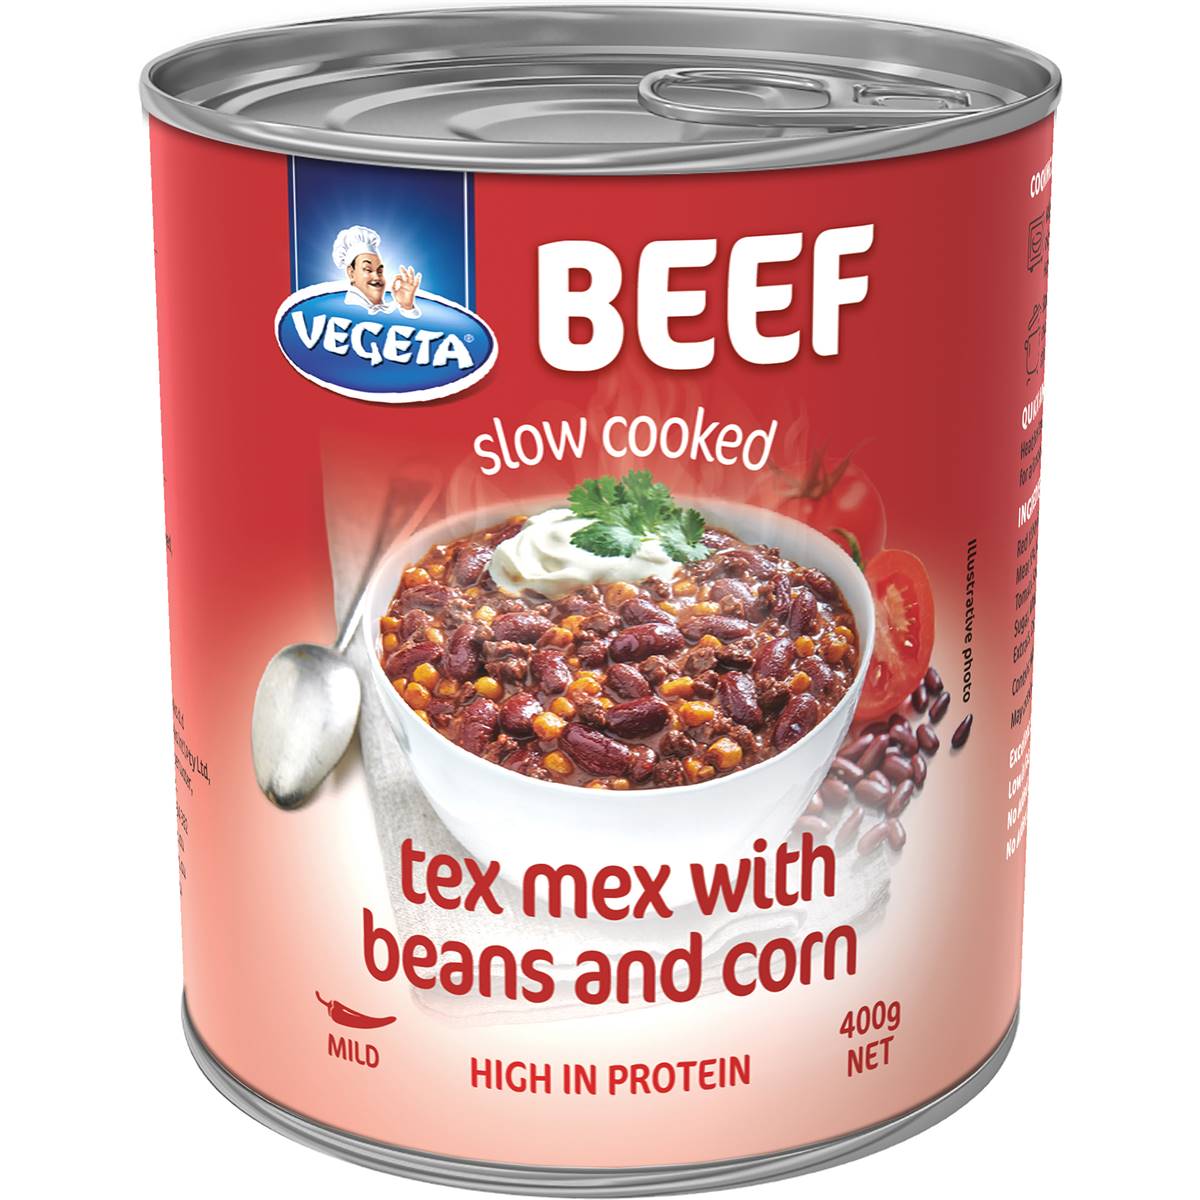 Calories in Vegeta Beef Slow Cooked Tex Mex With Beans & Corn